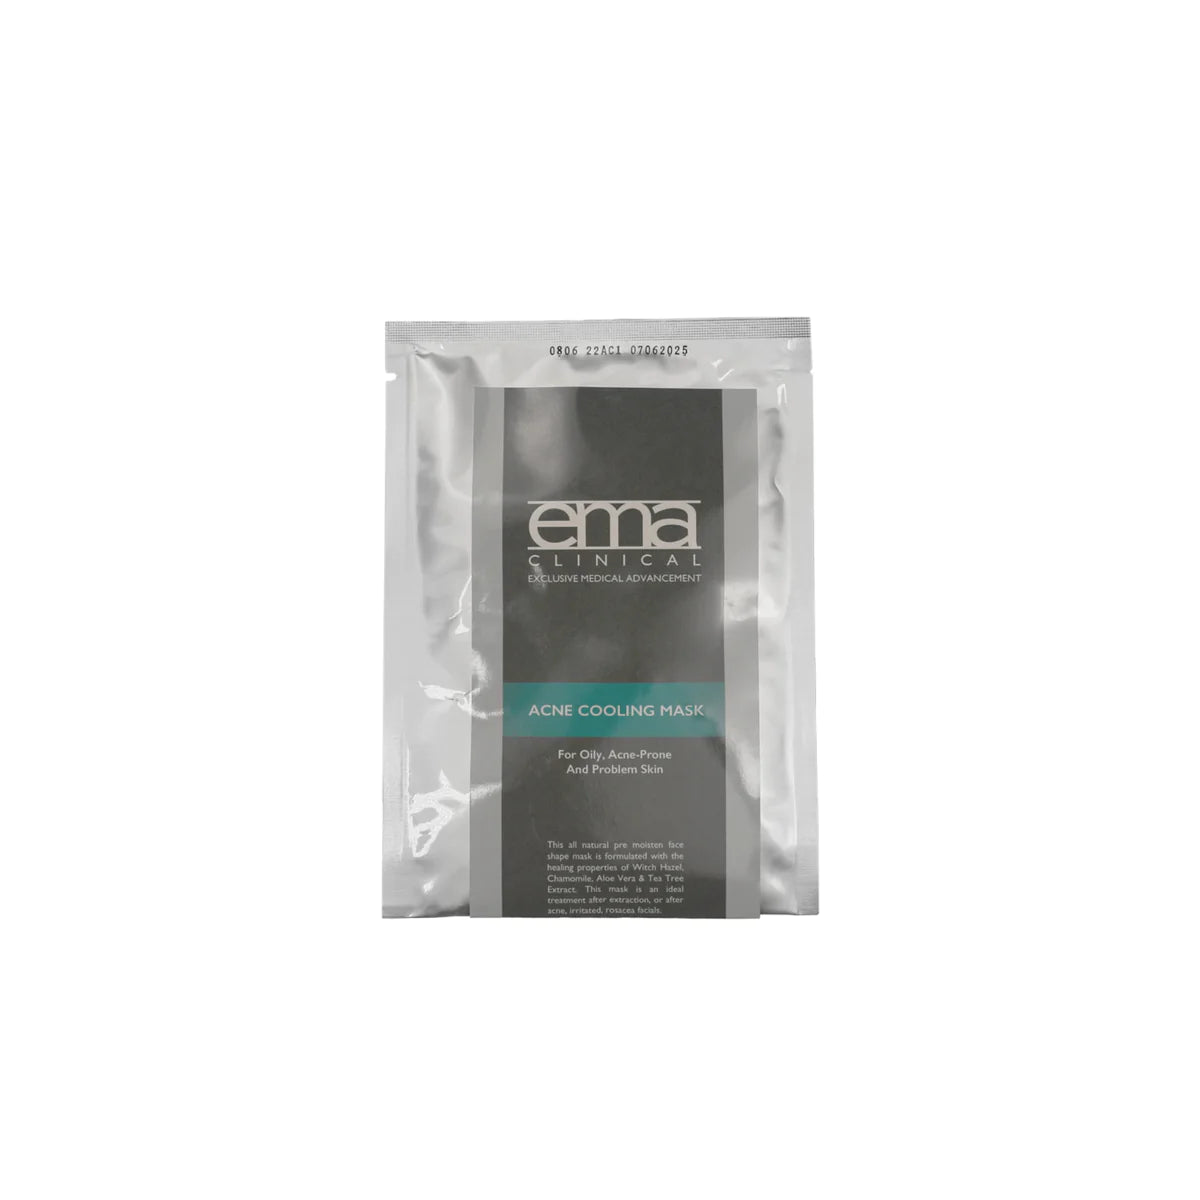 Acne Cooling Masque